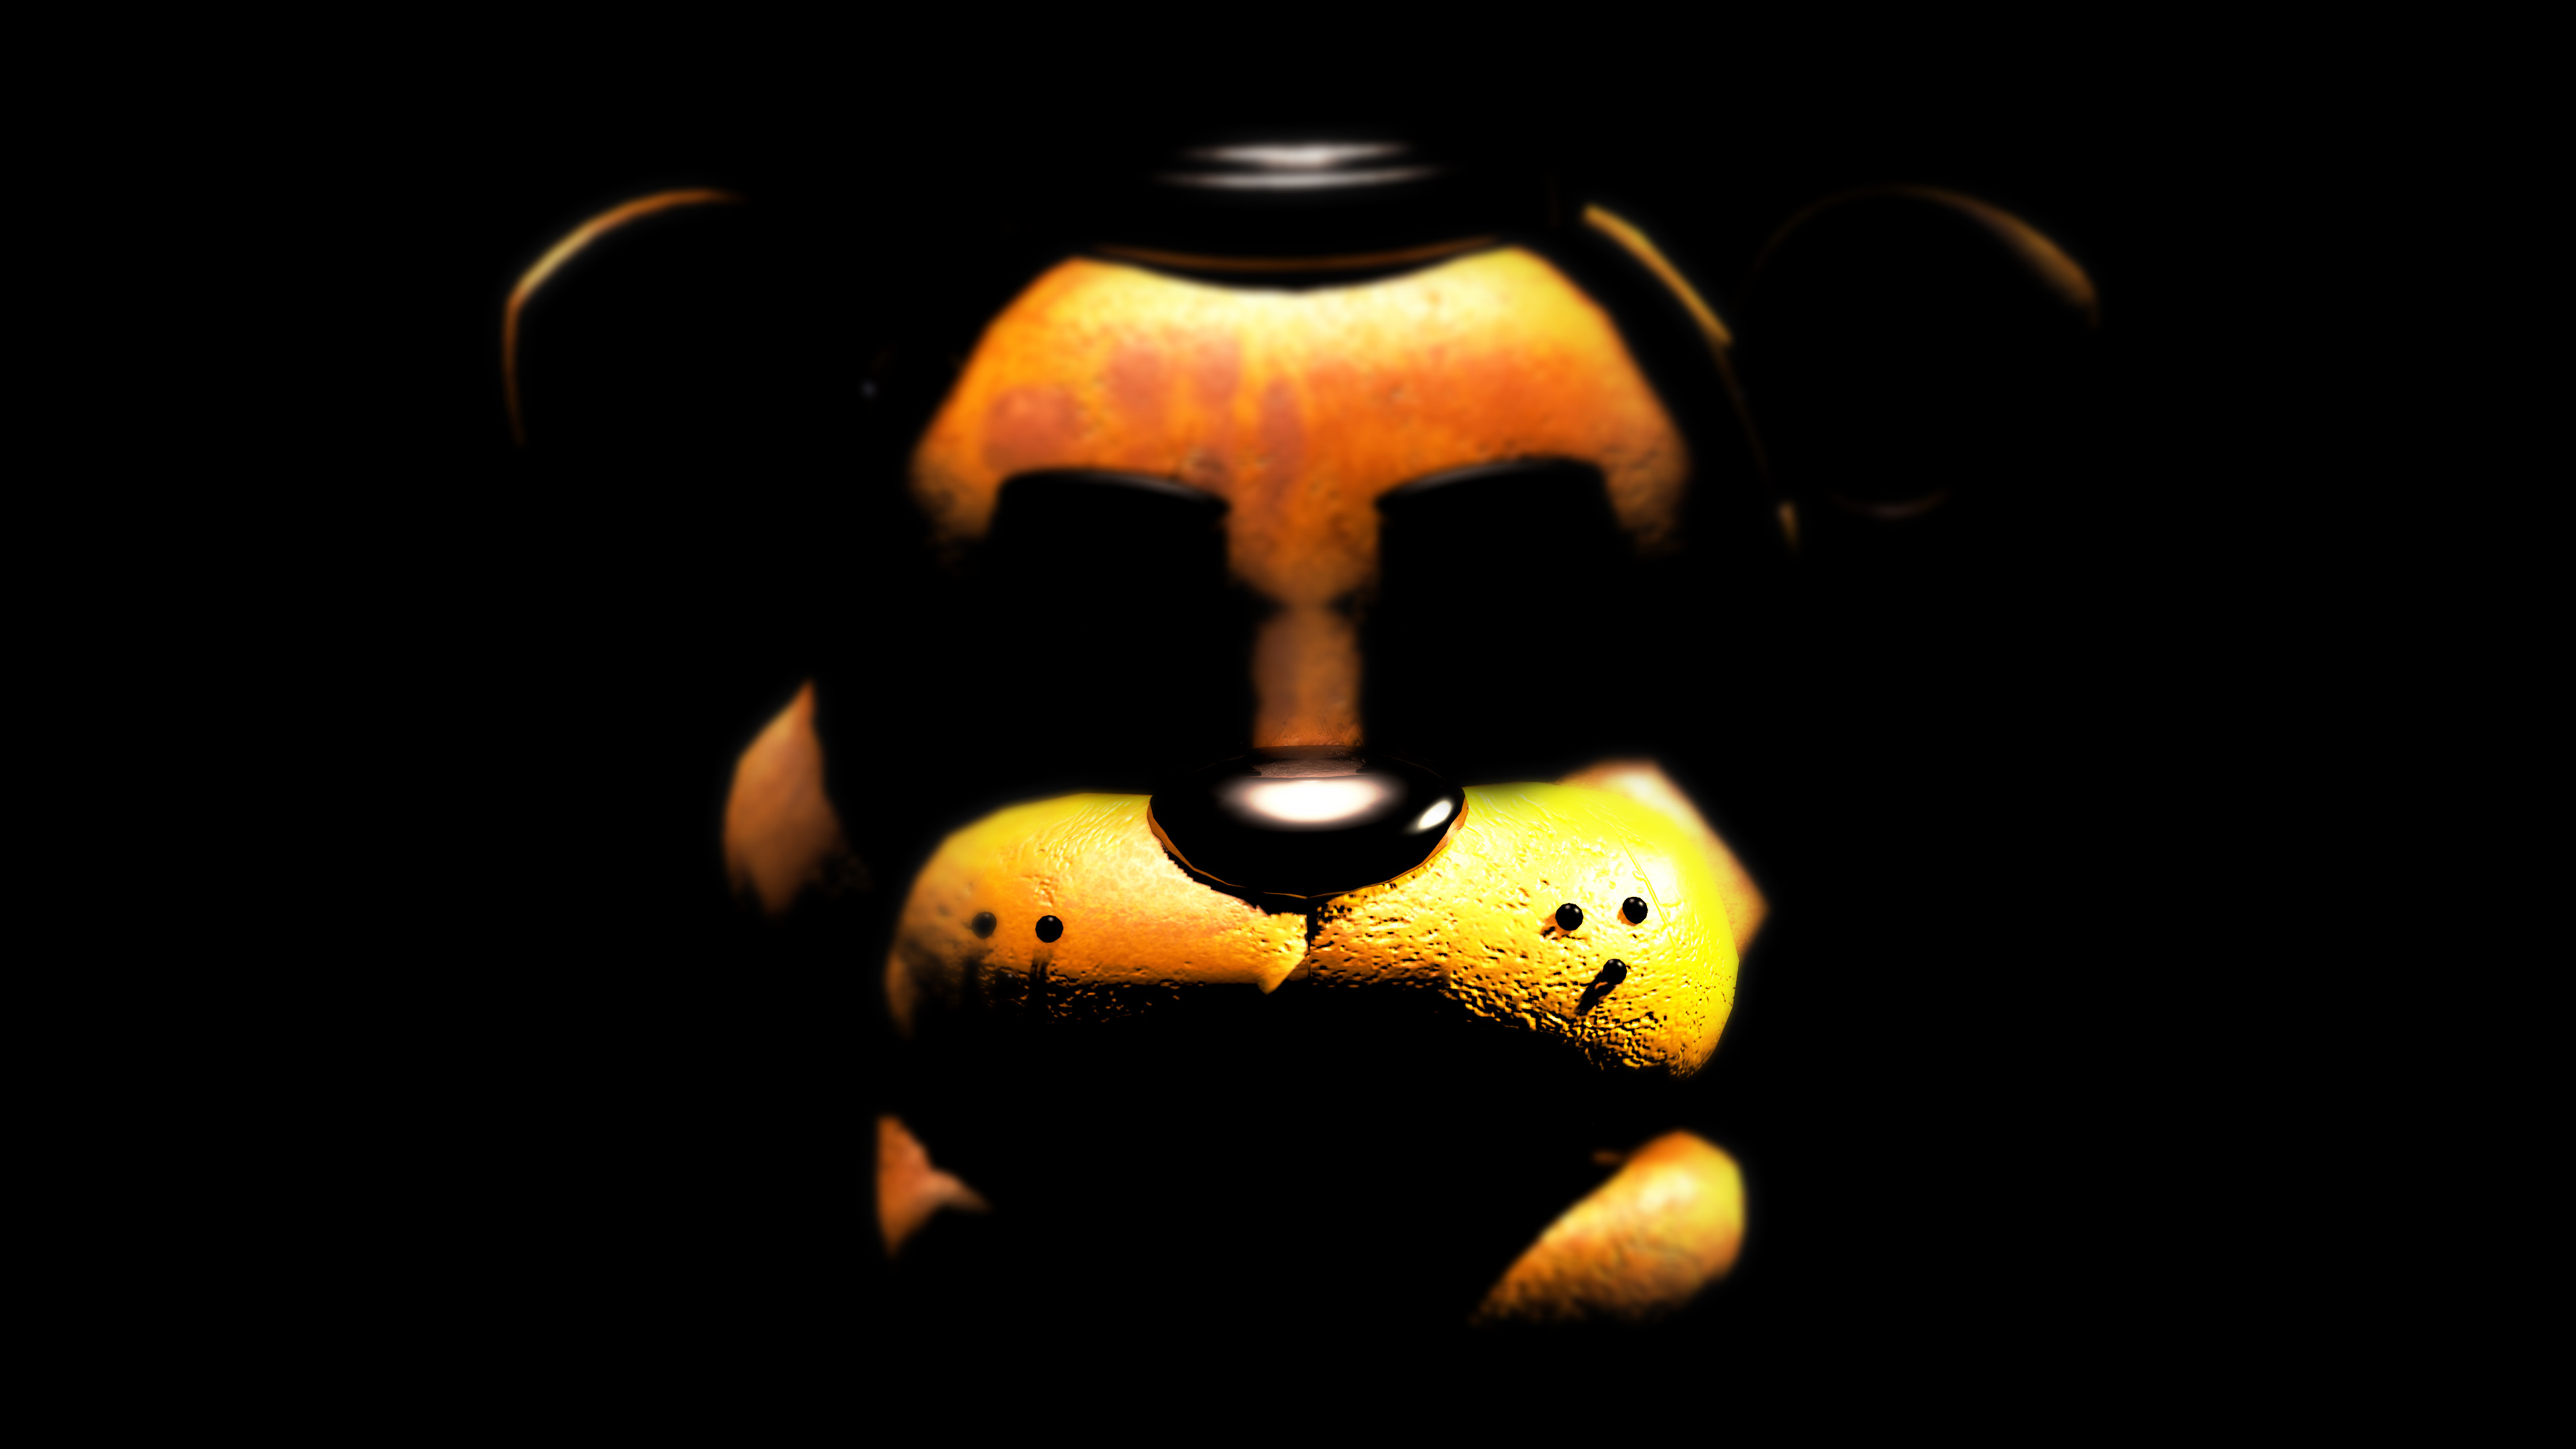 … Five Nights at Freddy's | Poster/Wallpaper #1 by GravityPro